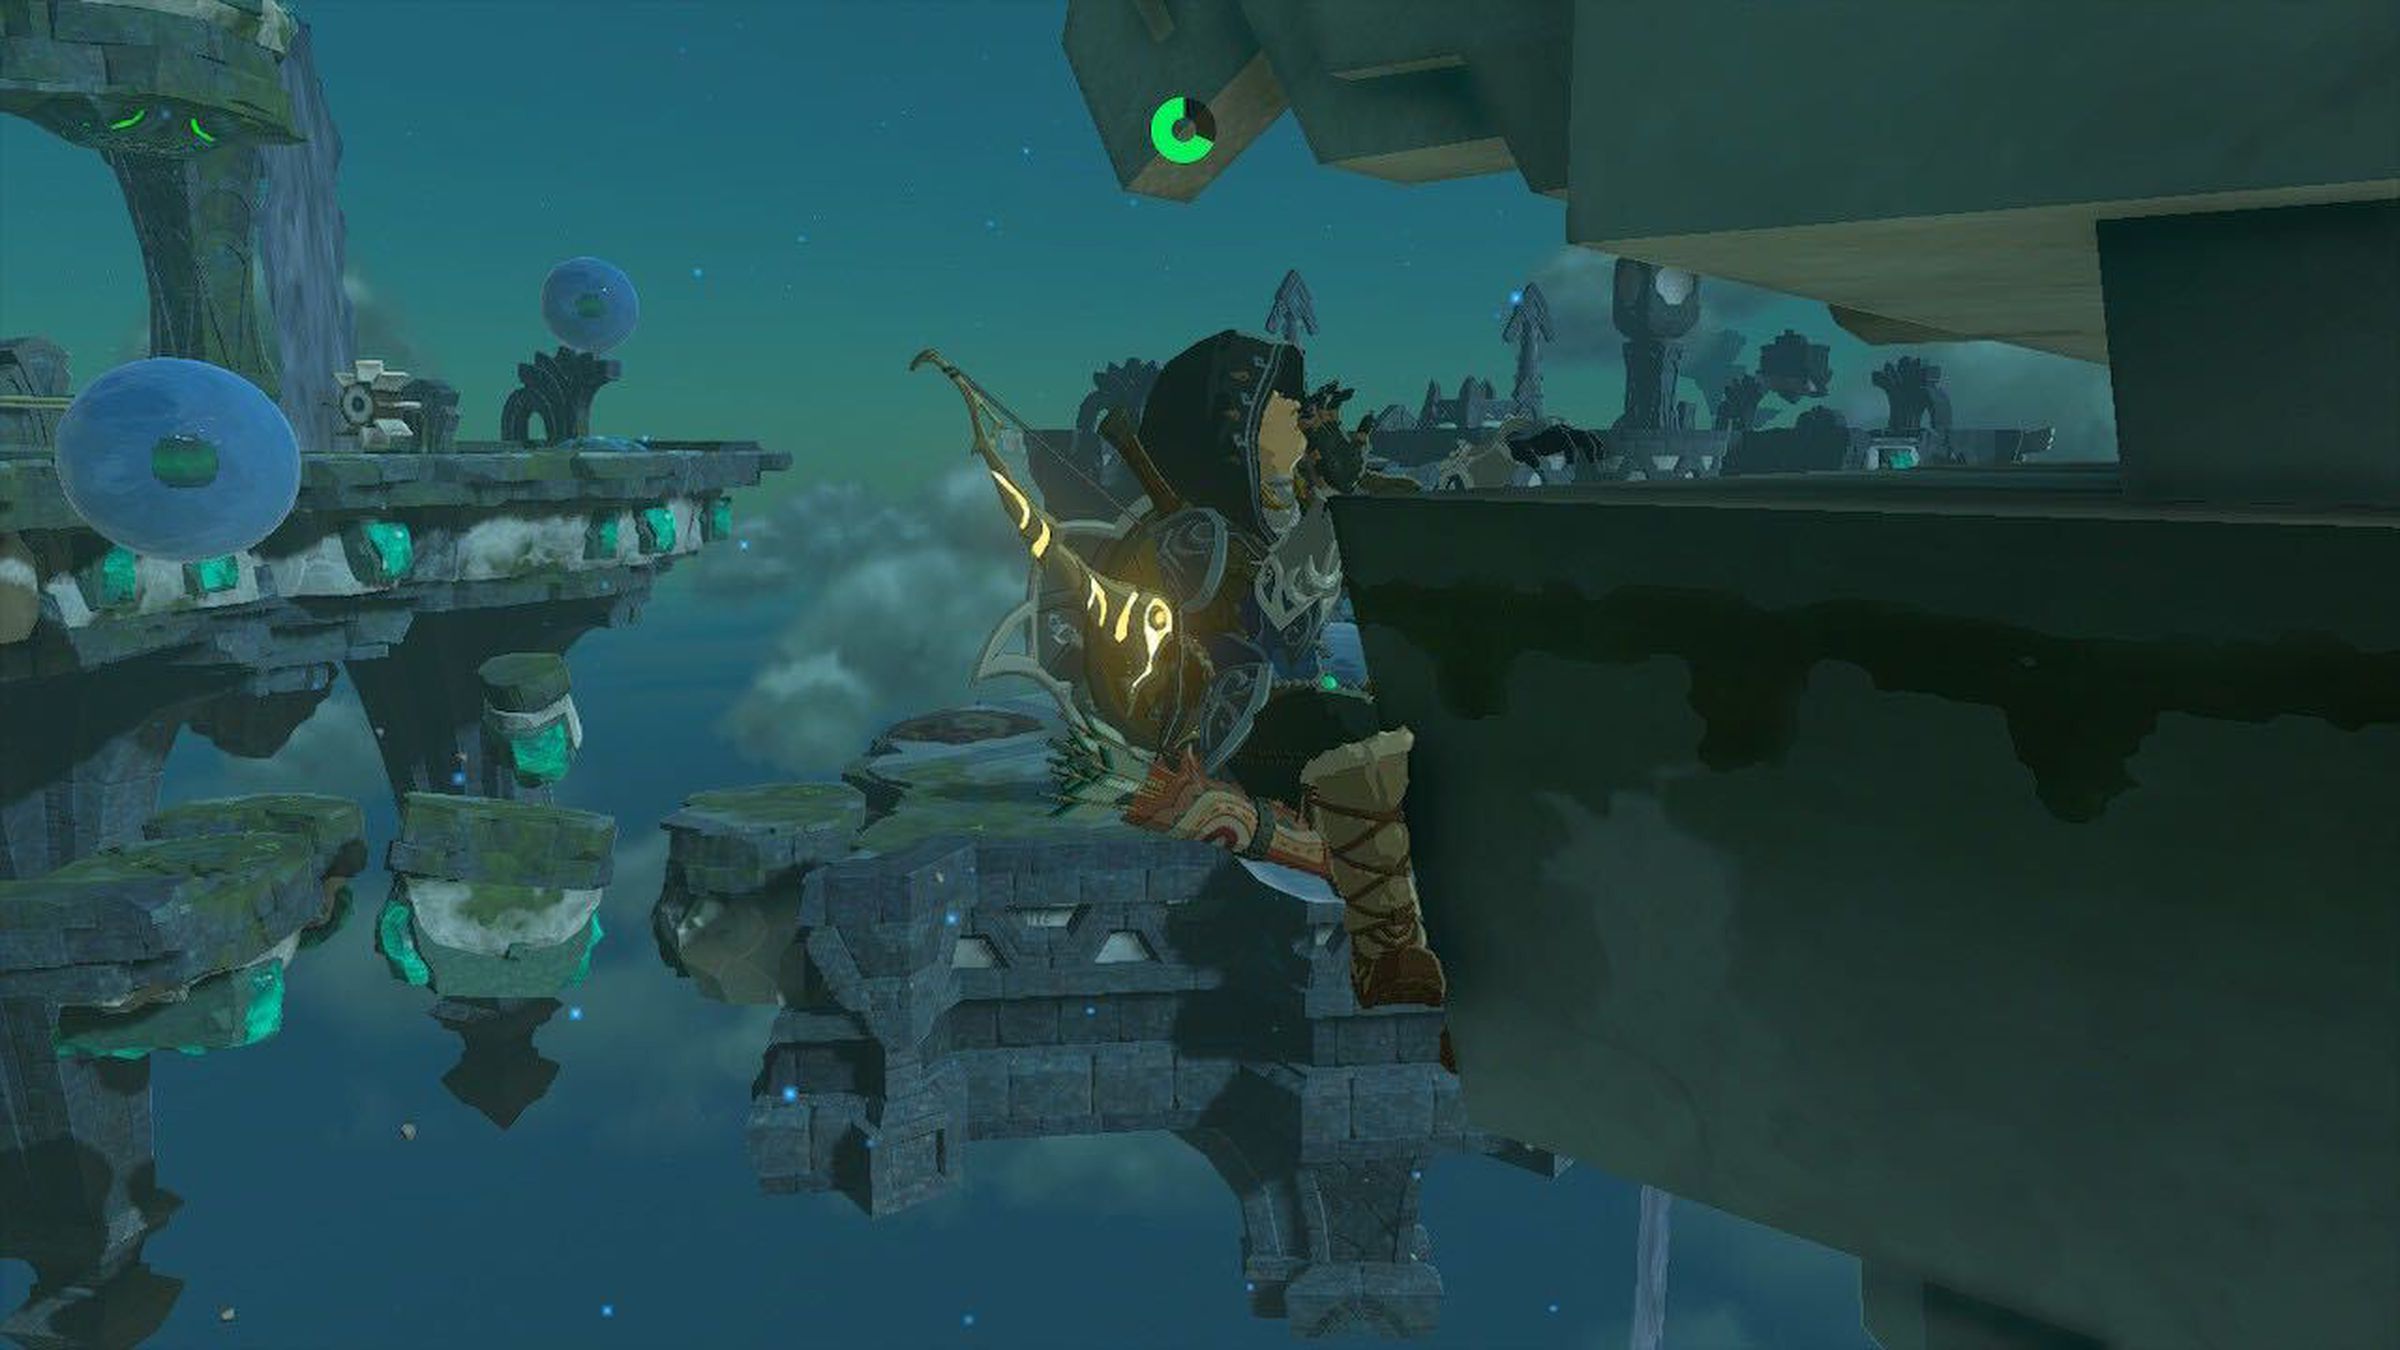 A hooded man with a bow and arrow strapped to his back clinging to a floating platform in the sky. Behind him are multiple massive floating platforms, and in the distance are clouds, indicating that all of this is very high in the sky.